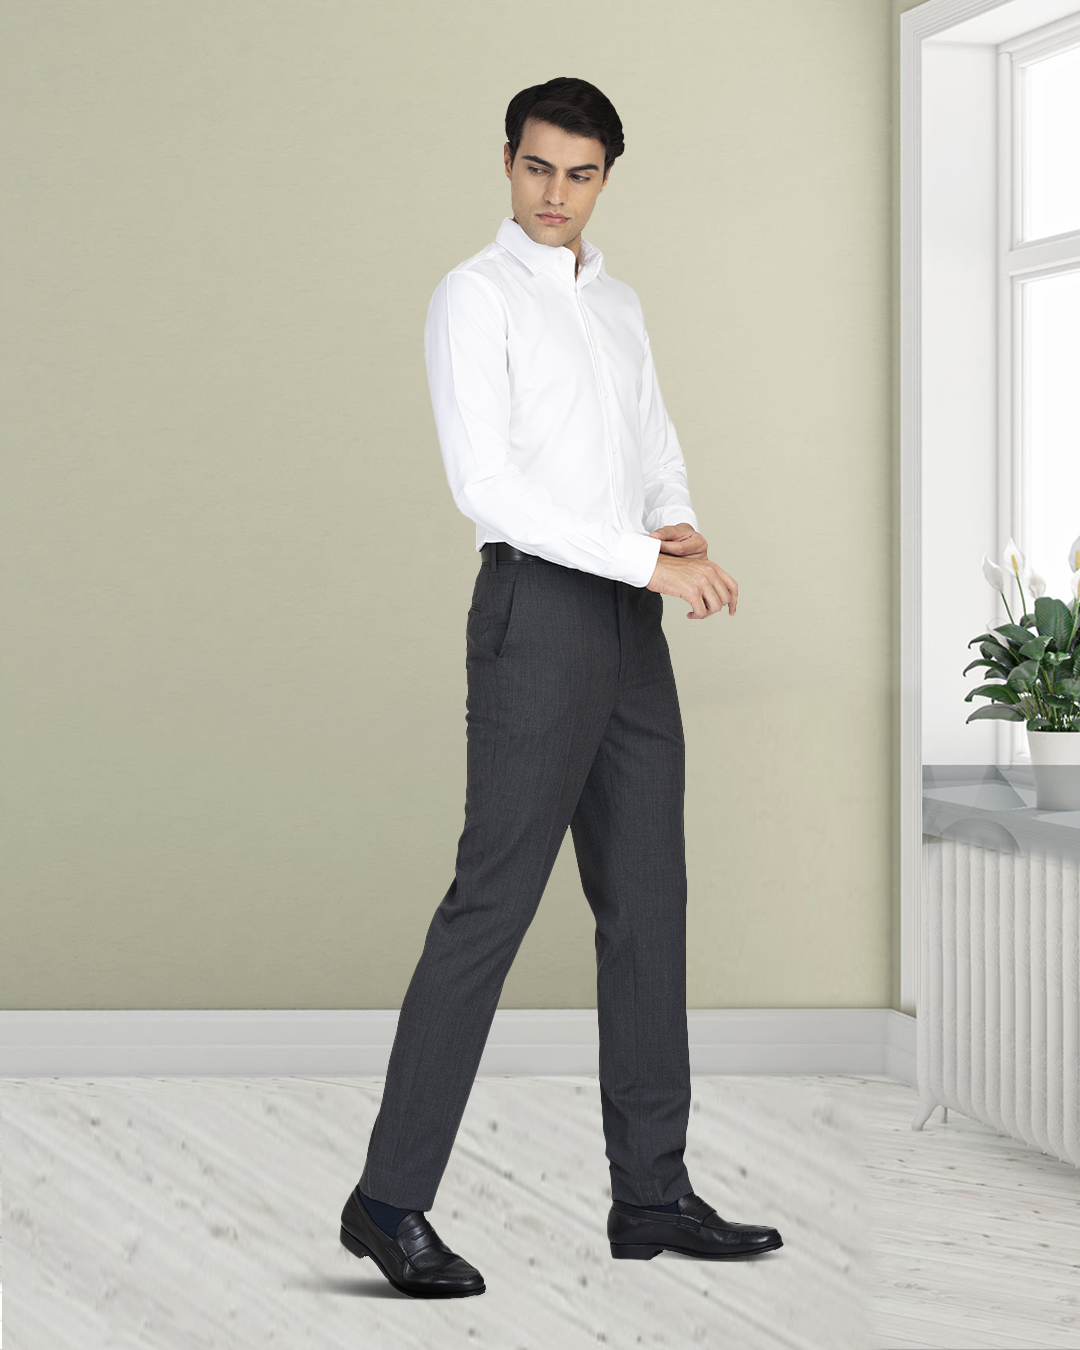 Model wearing the custom oxford shirt for men by Luxire in brembana white royal 2